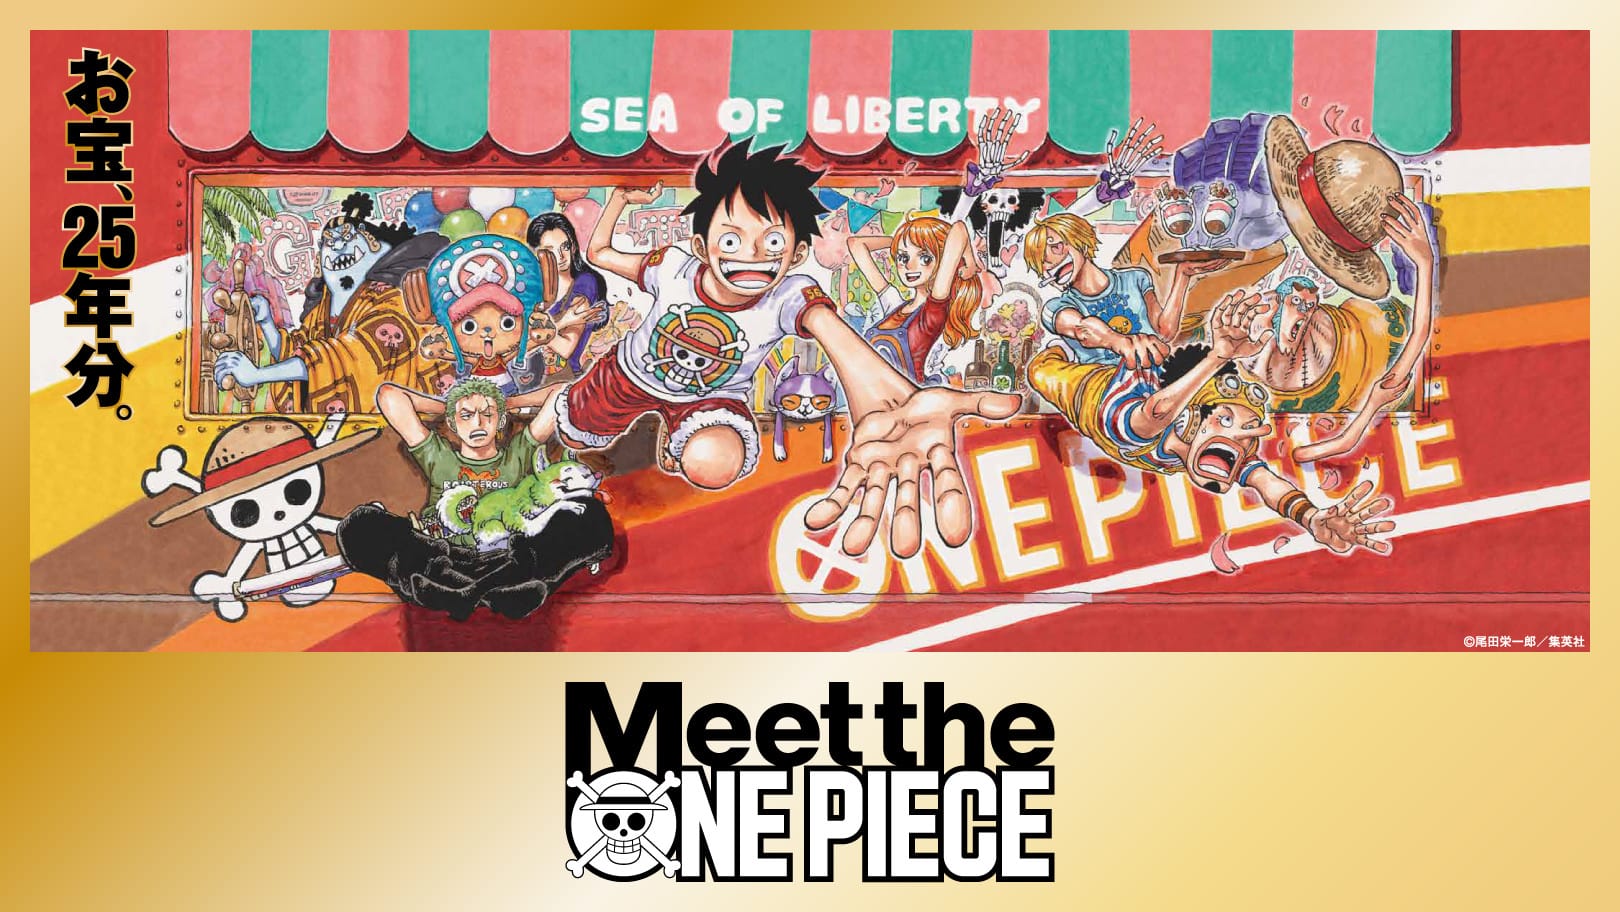 ONE PIECE 25年分のグッズ展 in 渋谷キャスト 7月23日より開催!